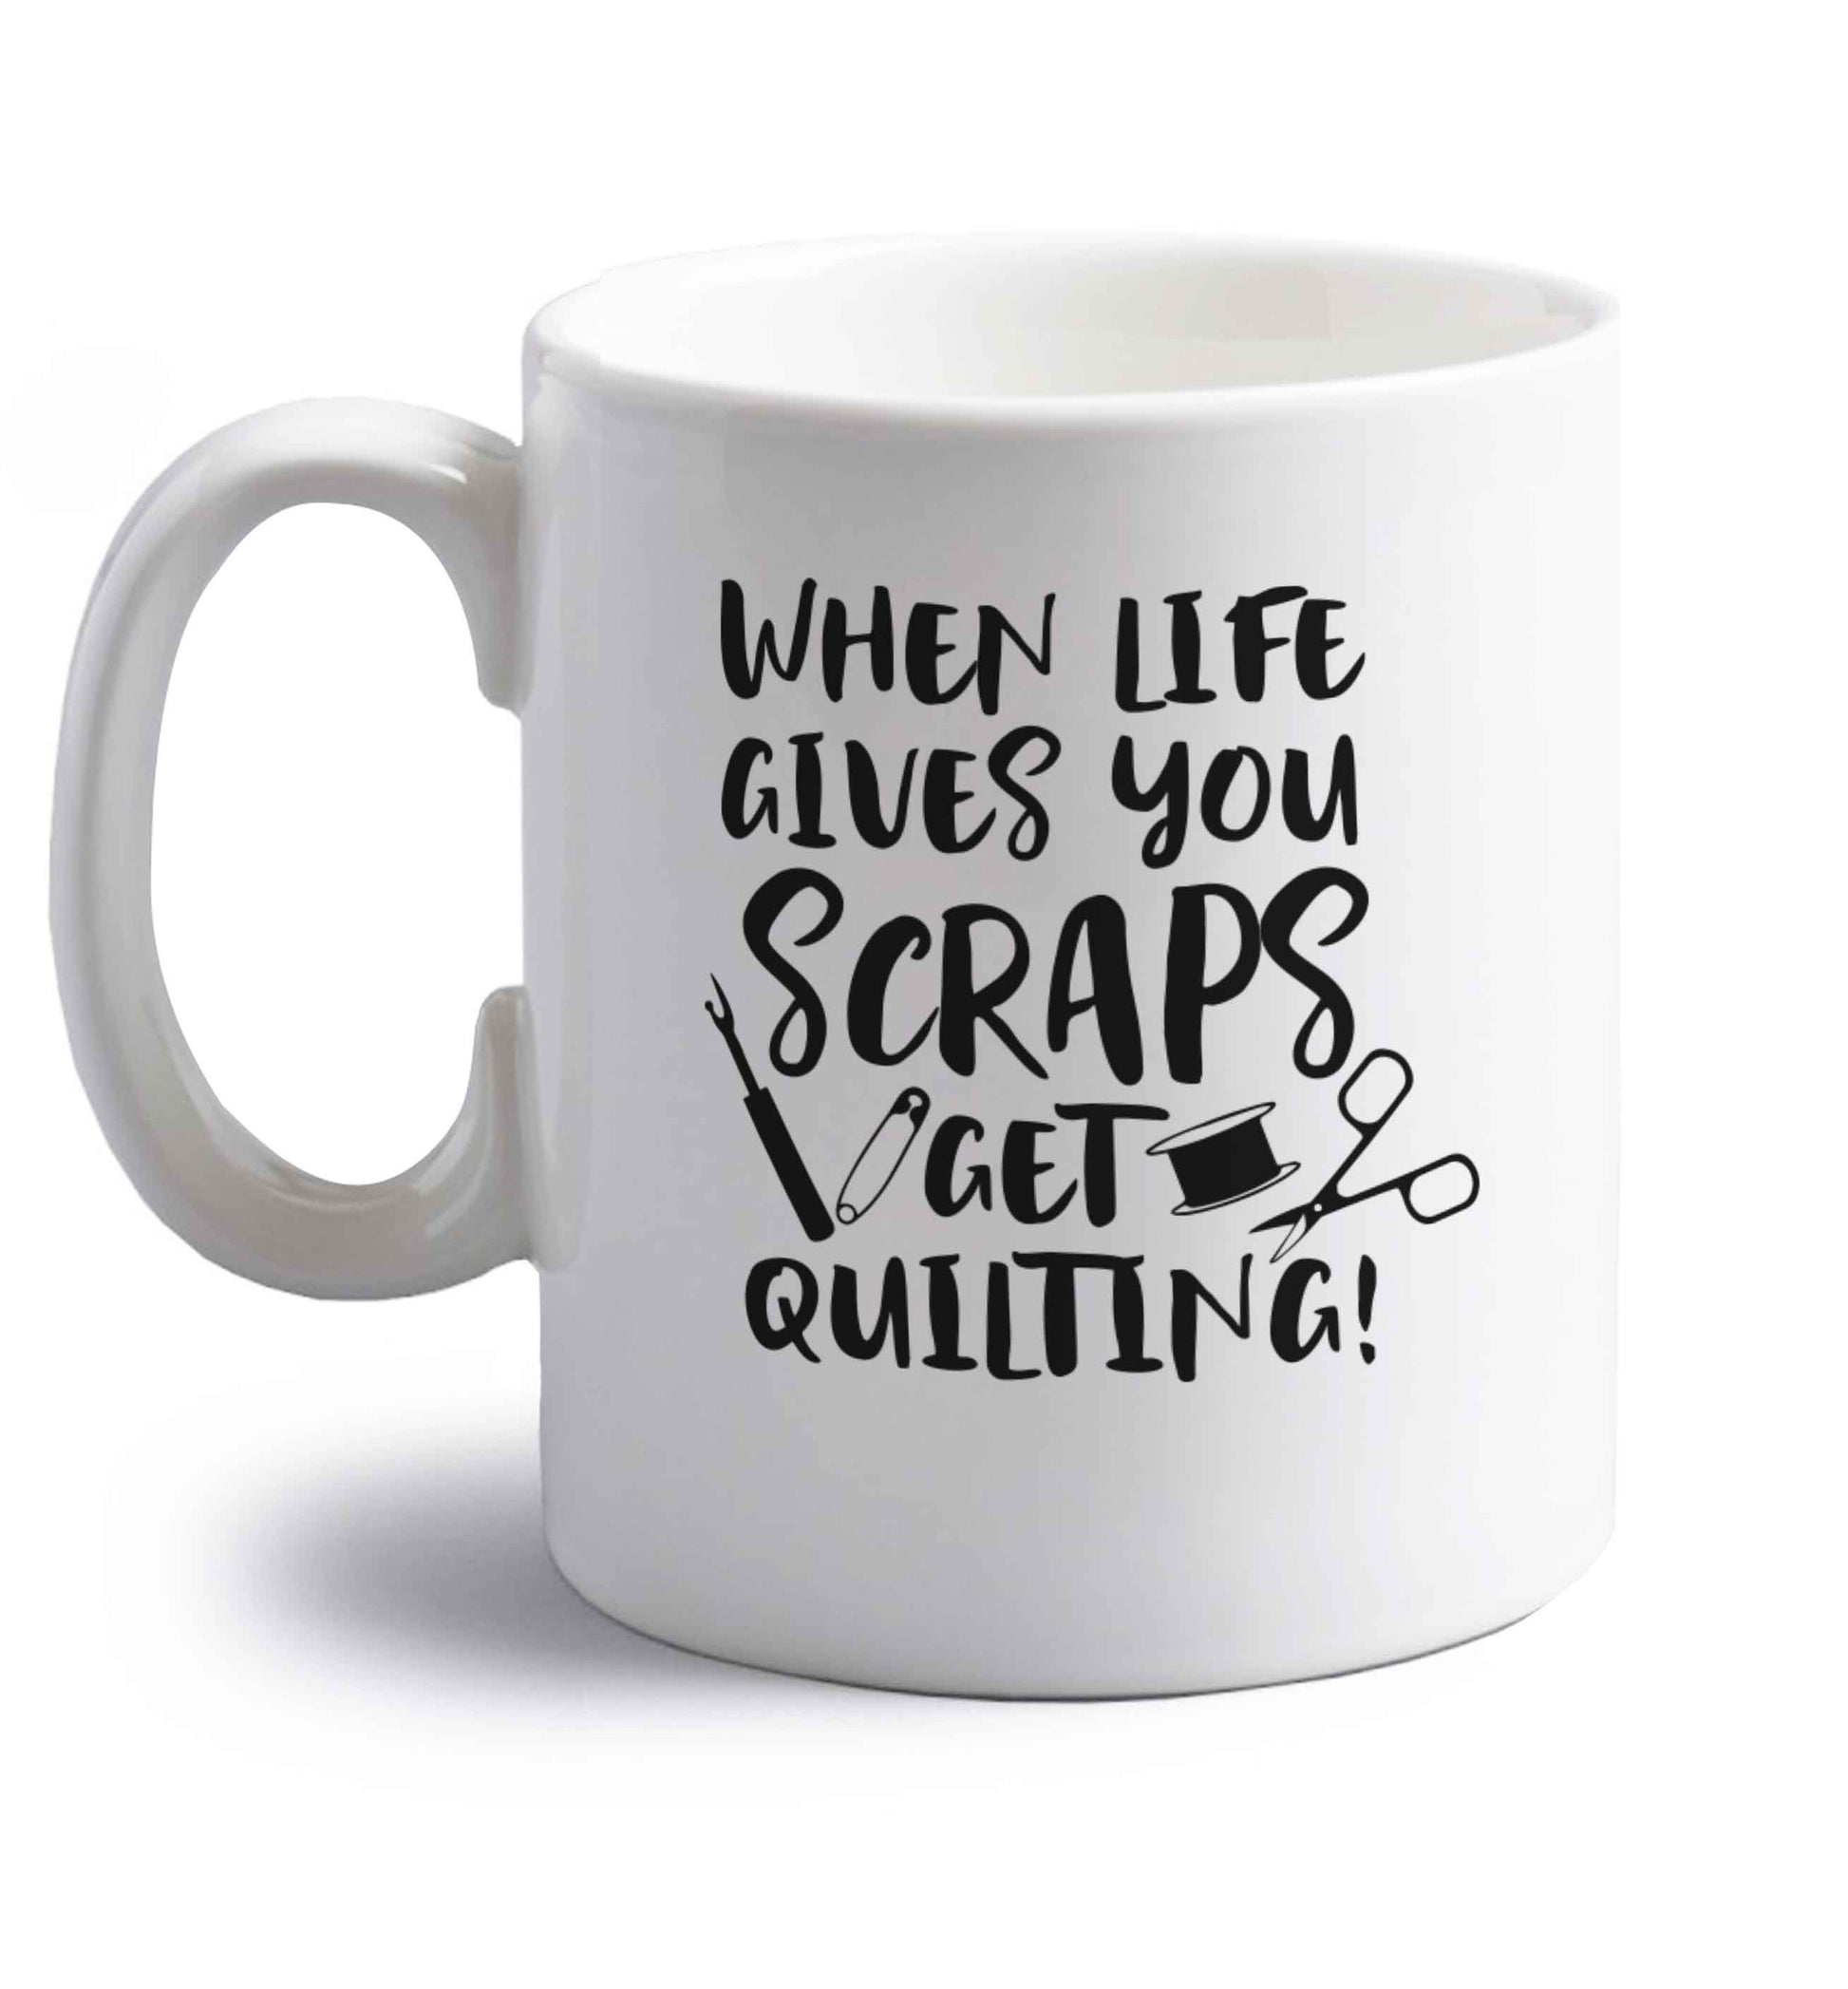 When life gives you scraps get quilting! right handed white ceramic mug 